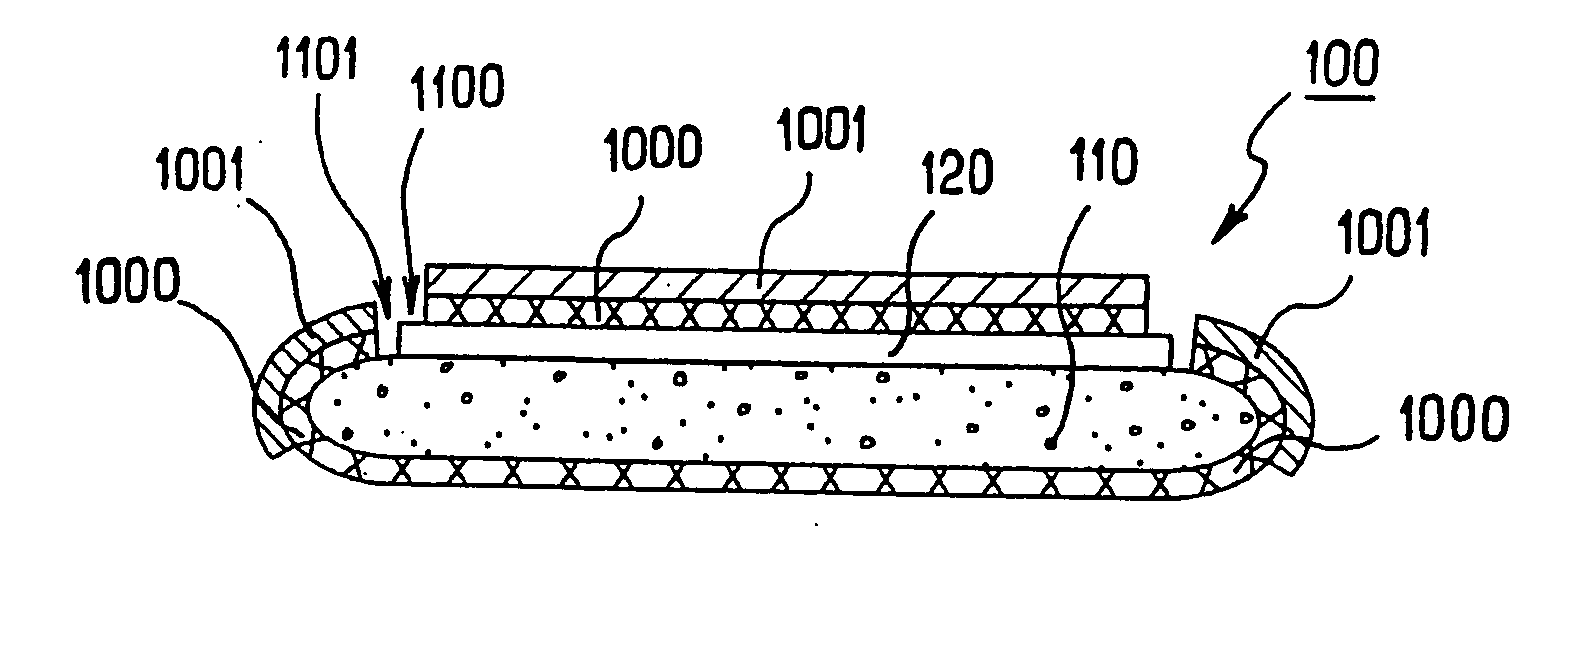 Surface treatment for multi-layer wafers formed from layers of materials chosen from among semiconducting materials